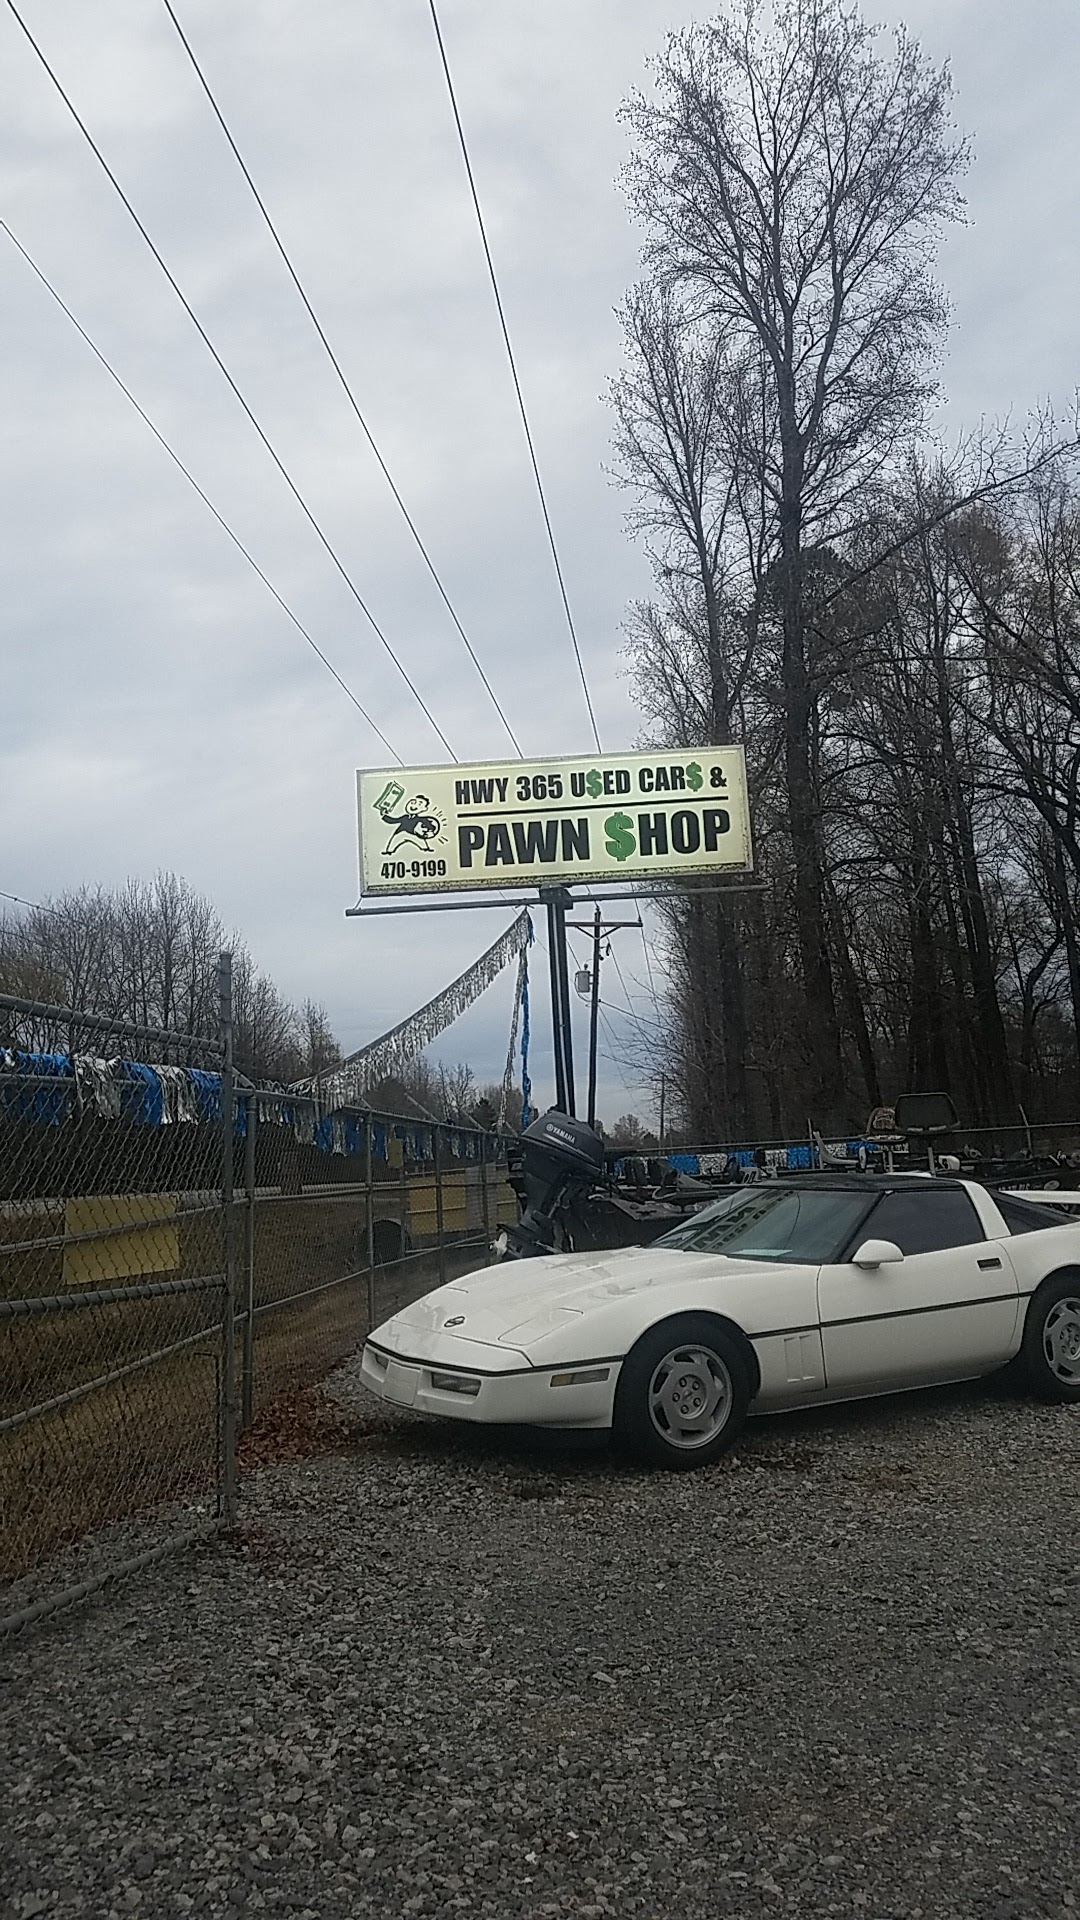 Highway 365 Used Cars & Pawn Shop